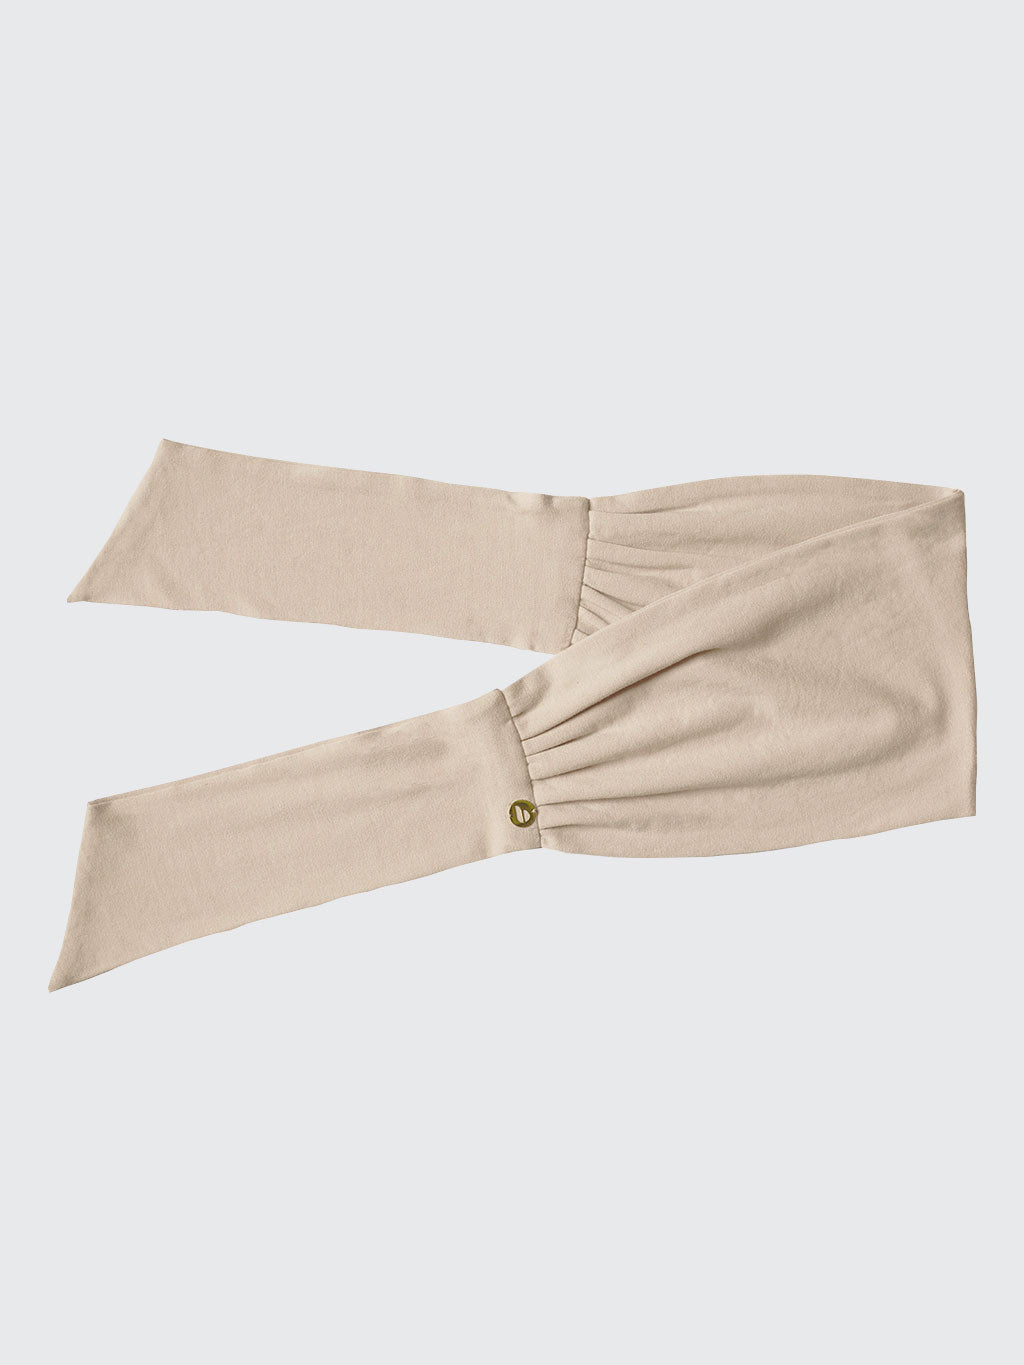 Beau Tie | Taupe